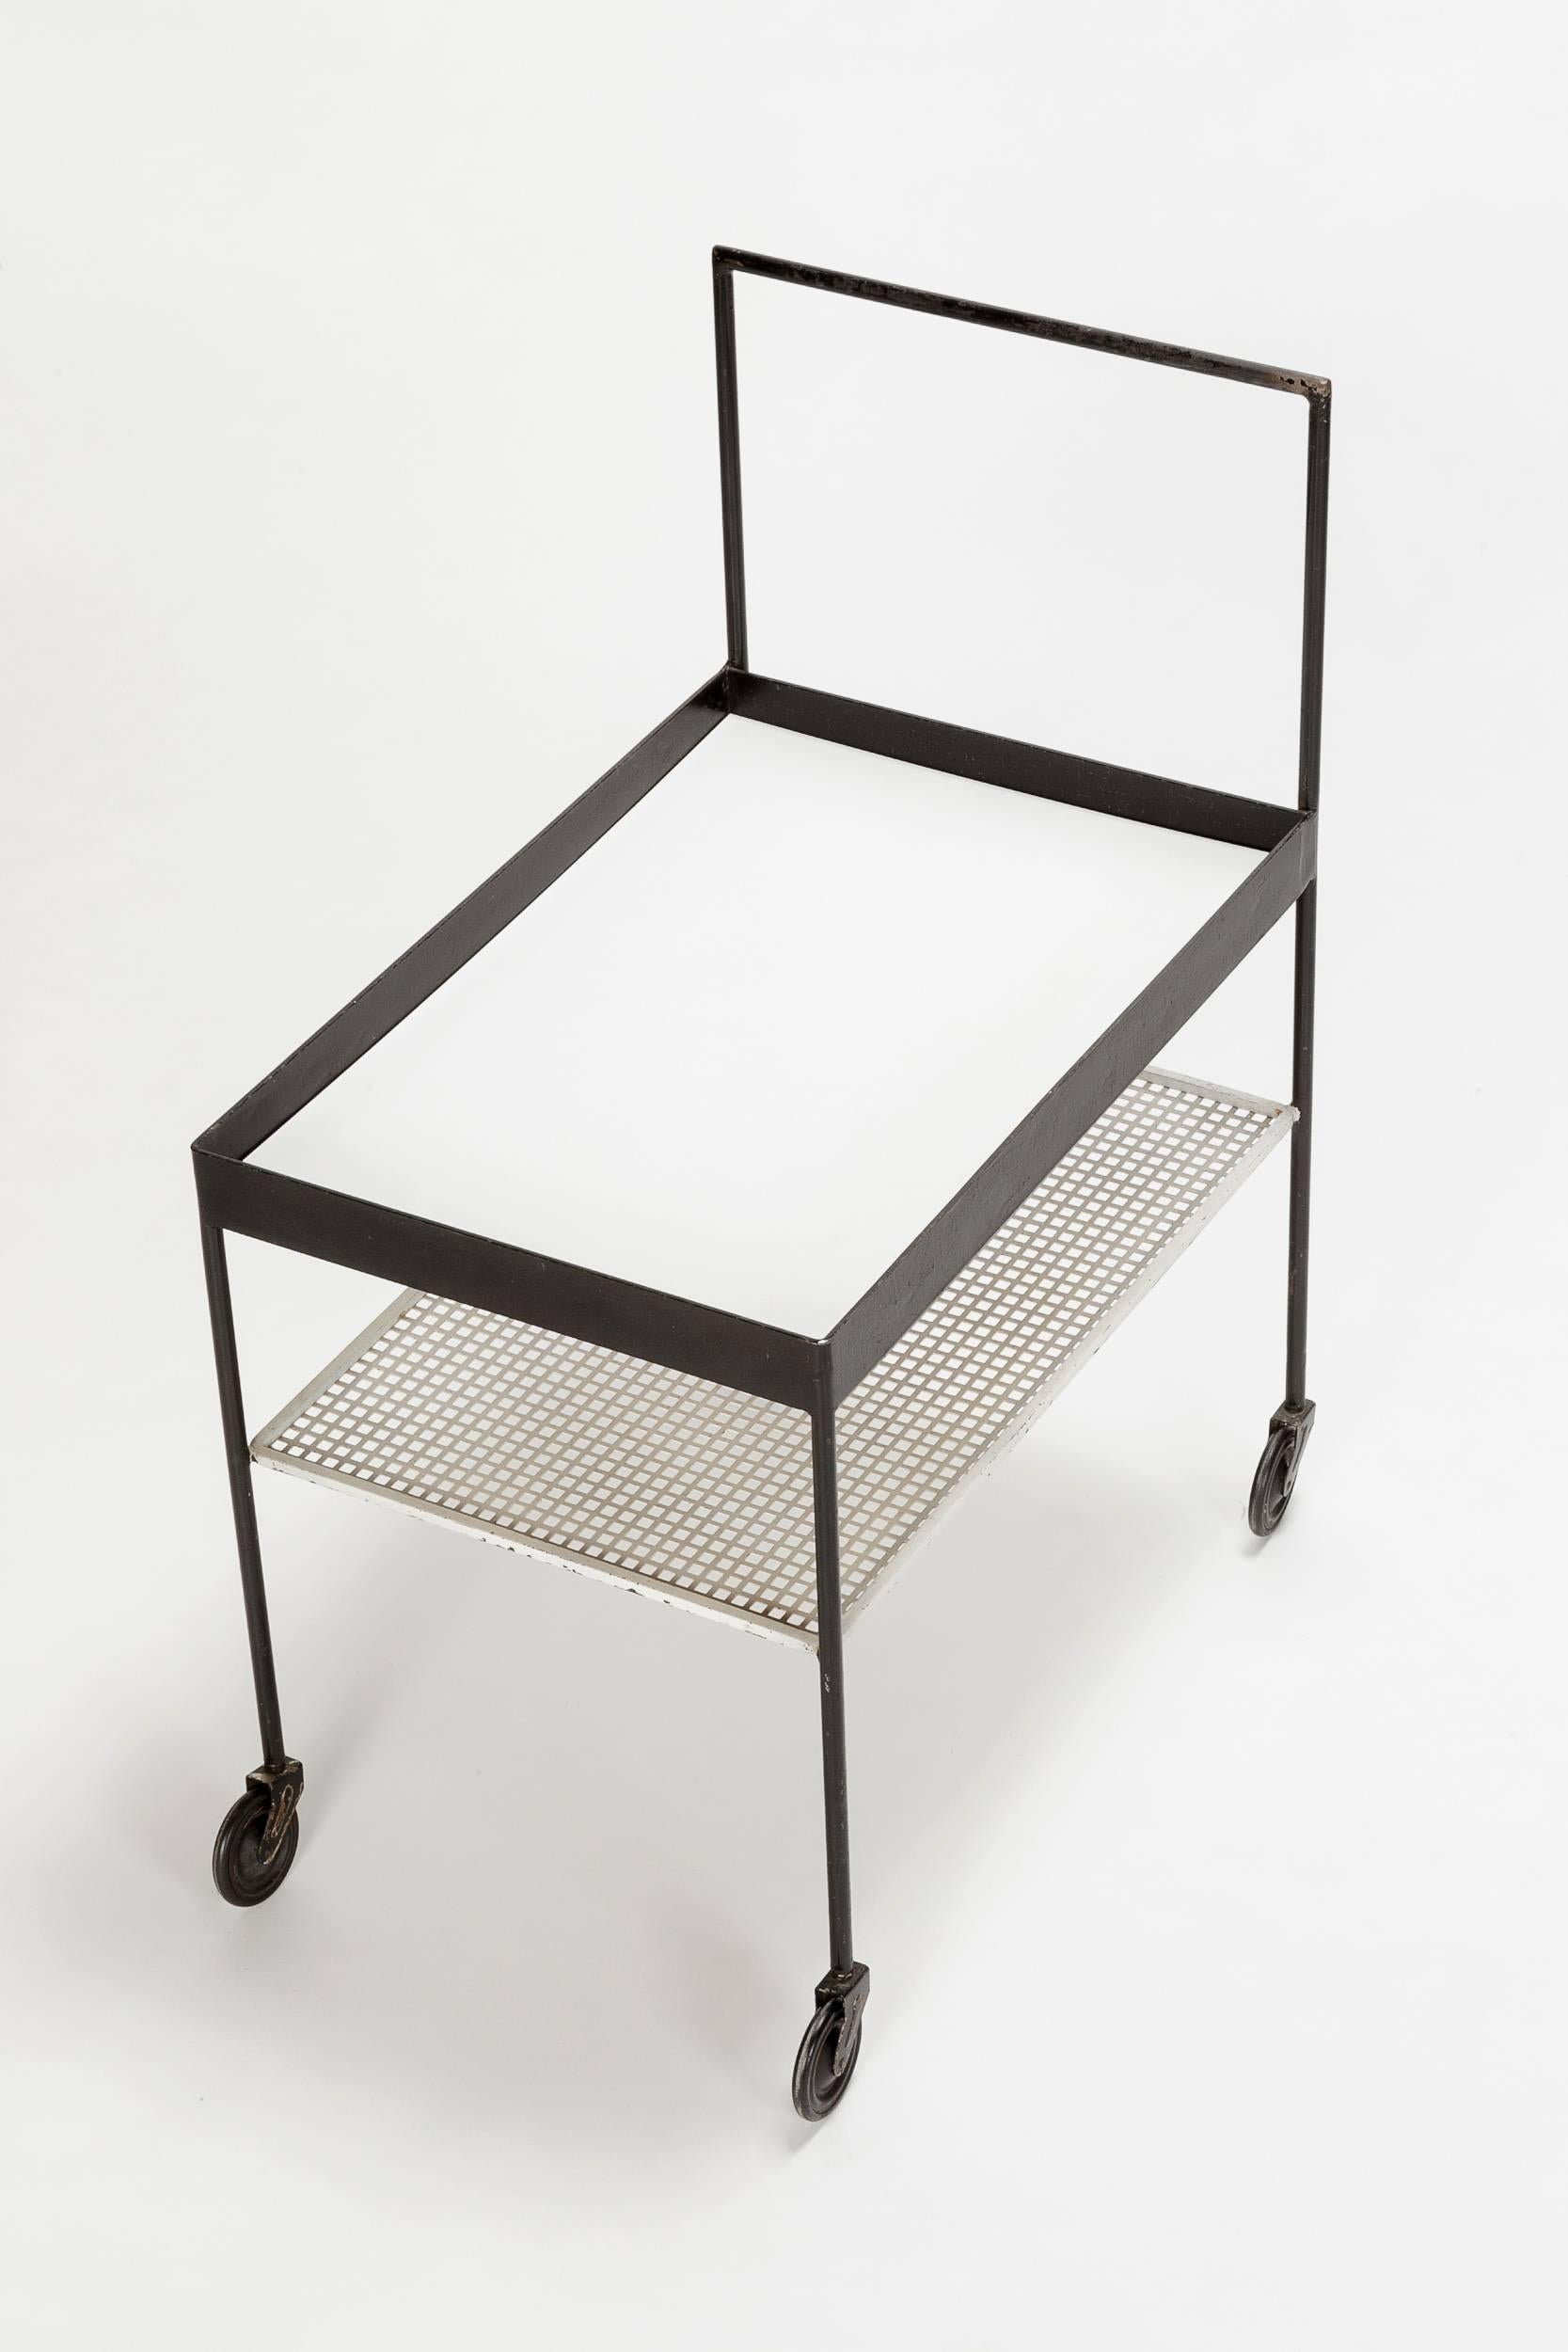 A wonderful geometric bar cart attributed to Mathieu Matégot in black and white lacquered metal, manufactured in France in the 1950s. Cut out white metal shelf space, the top is covered with white Formica. Original rubber coated wheels.